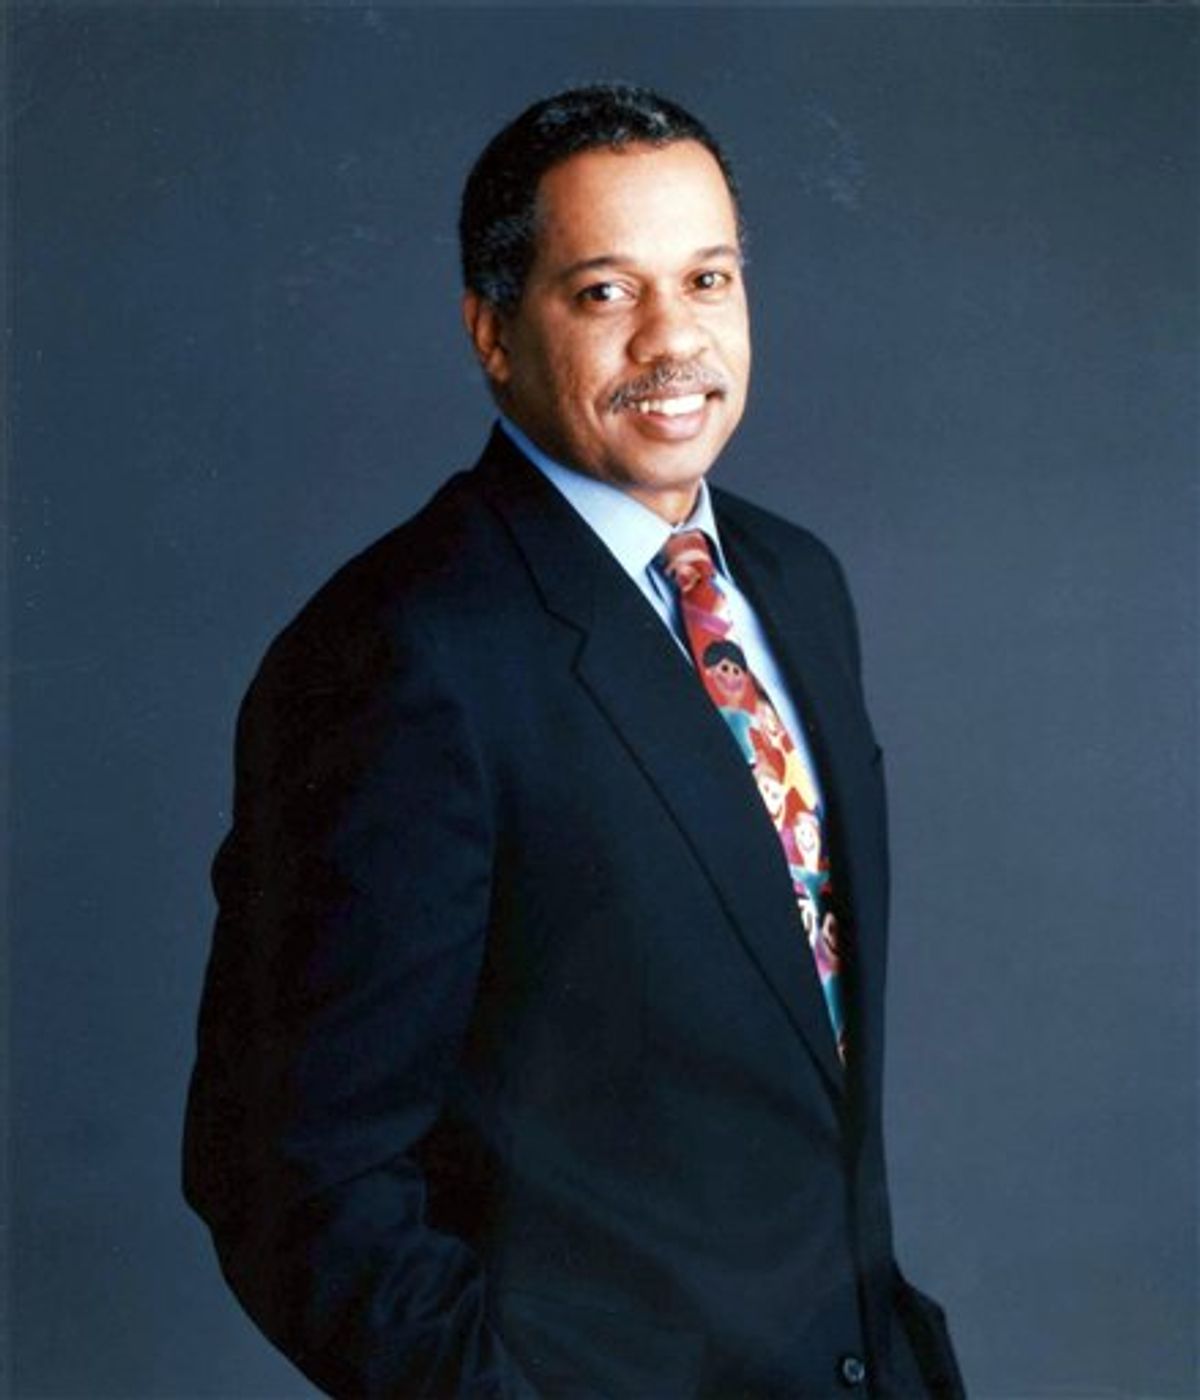 FILE- This undated photo released by SeniorNet shows NPR news analyst Juan Williams.  NPR News says that it has terminated the contract of Williams after remarks he made about Muslims on The O'Reilly Factor.  (AP Photo/SeniorNet, File) NO SALES   (AP)